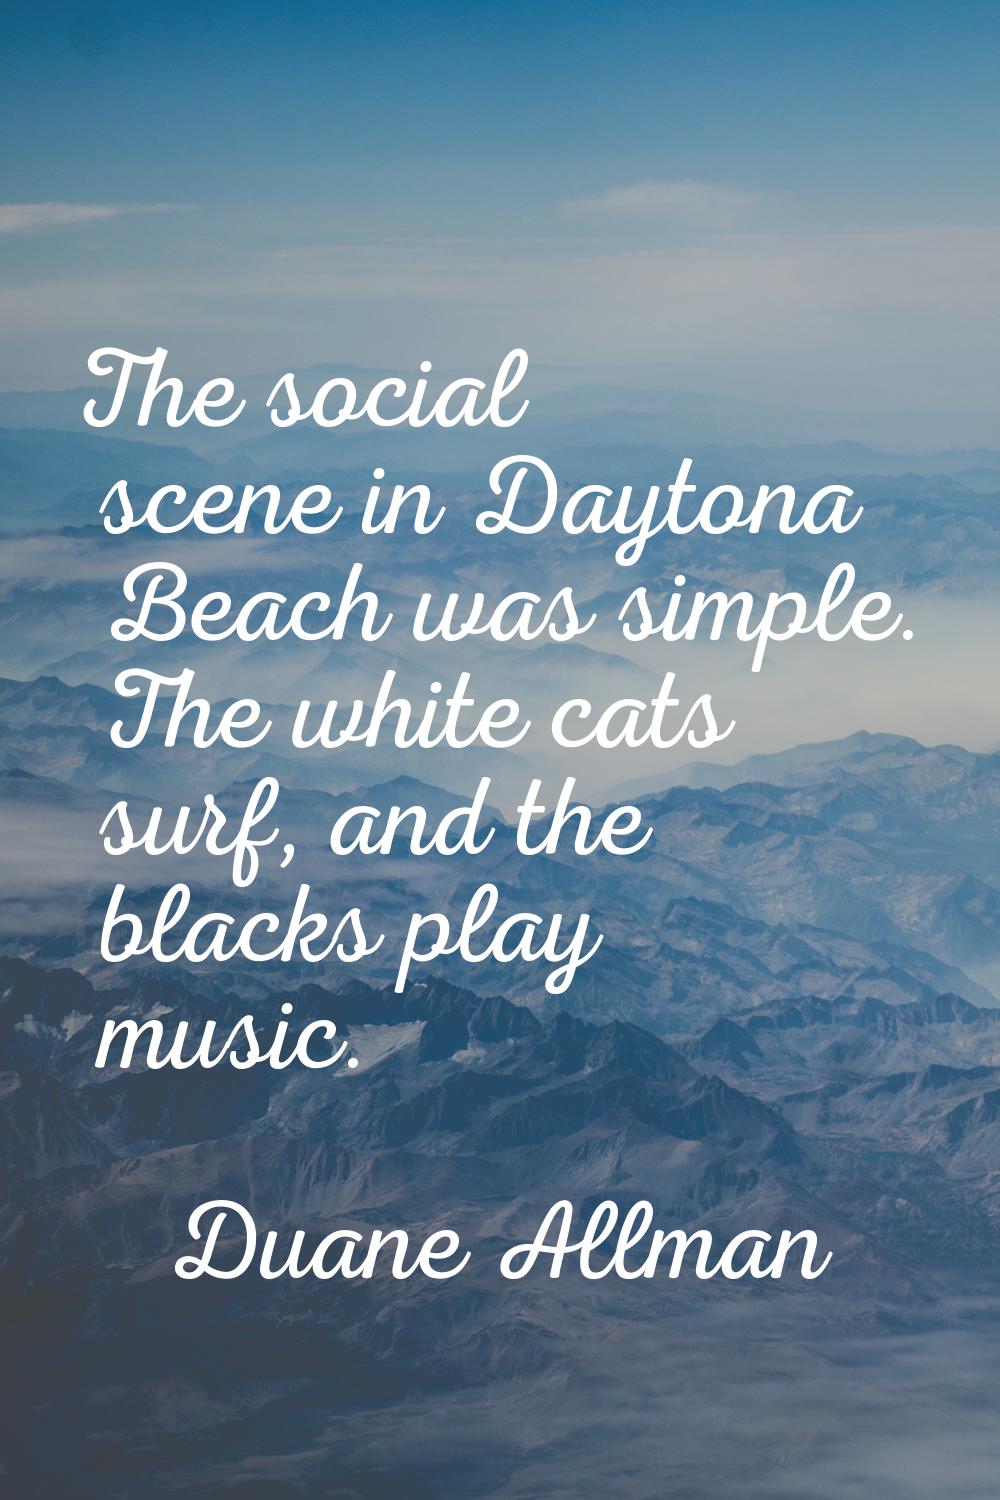 The social scene in Daytona Beach was simple. The white cats surf, and the blacks play music.